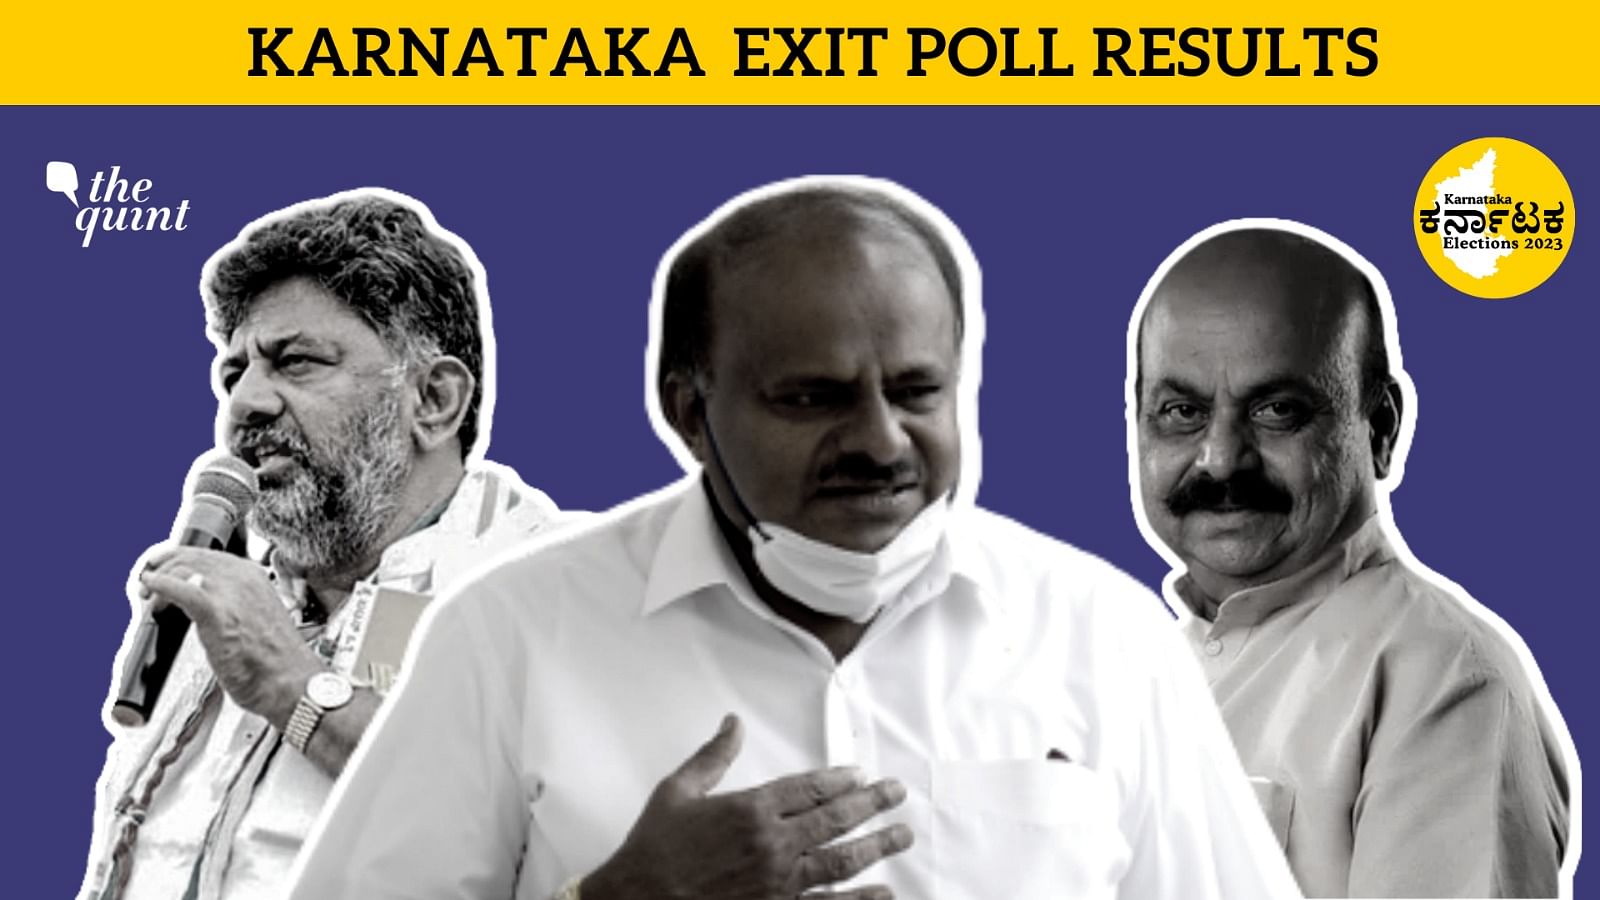 <div class="paragraphs"><p>Exit poll results poured in as Karnataka concluded polling on Wednesday, 10 May. While the exit polls are showing a diverse range of results, most polls place Congress as the single-largest party, ahead of the BJP.</p></div>